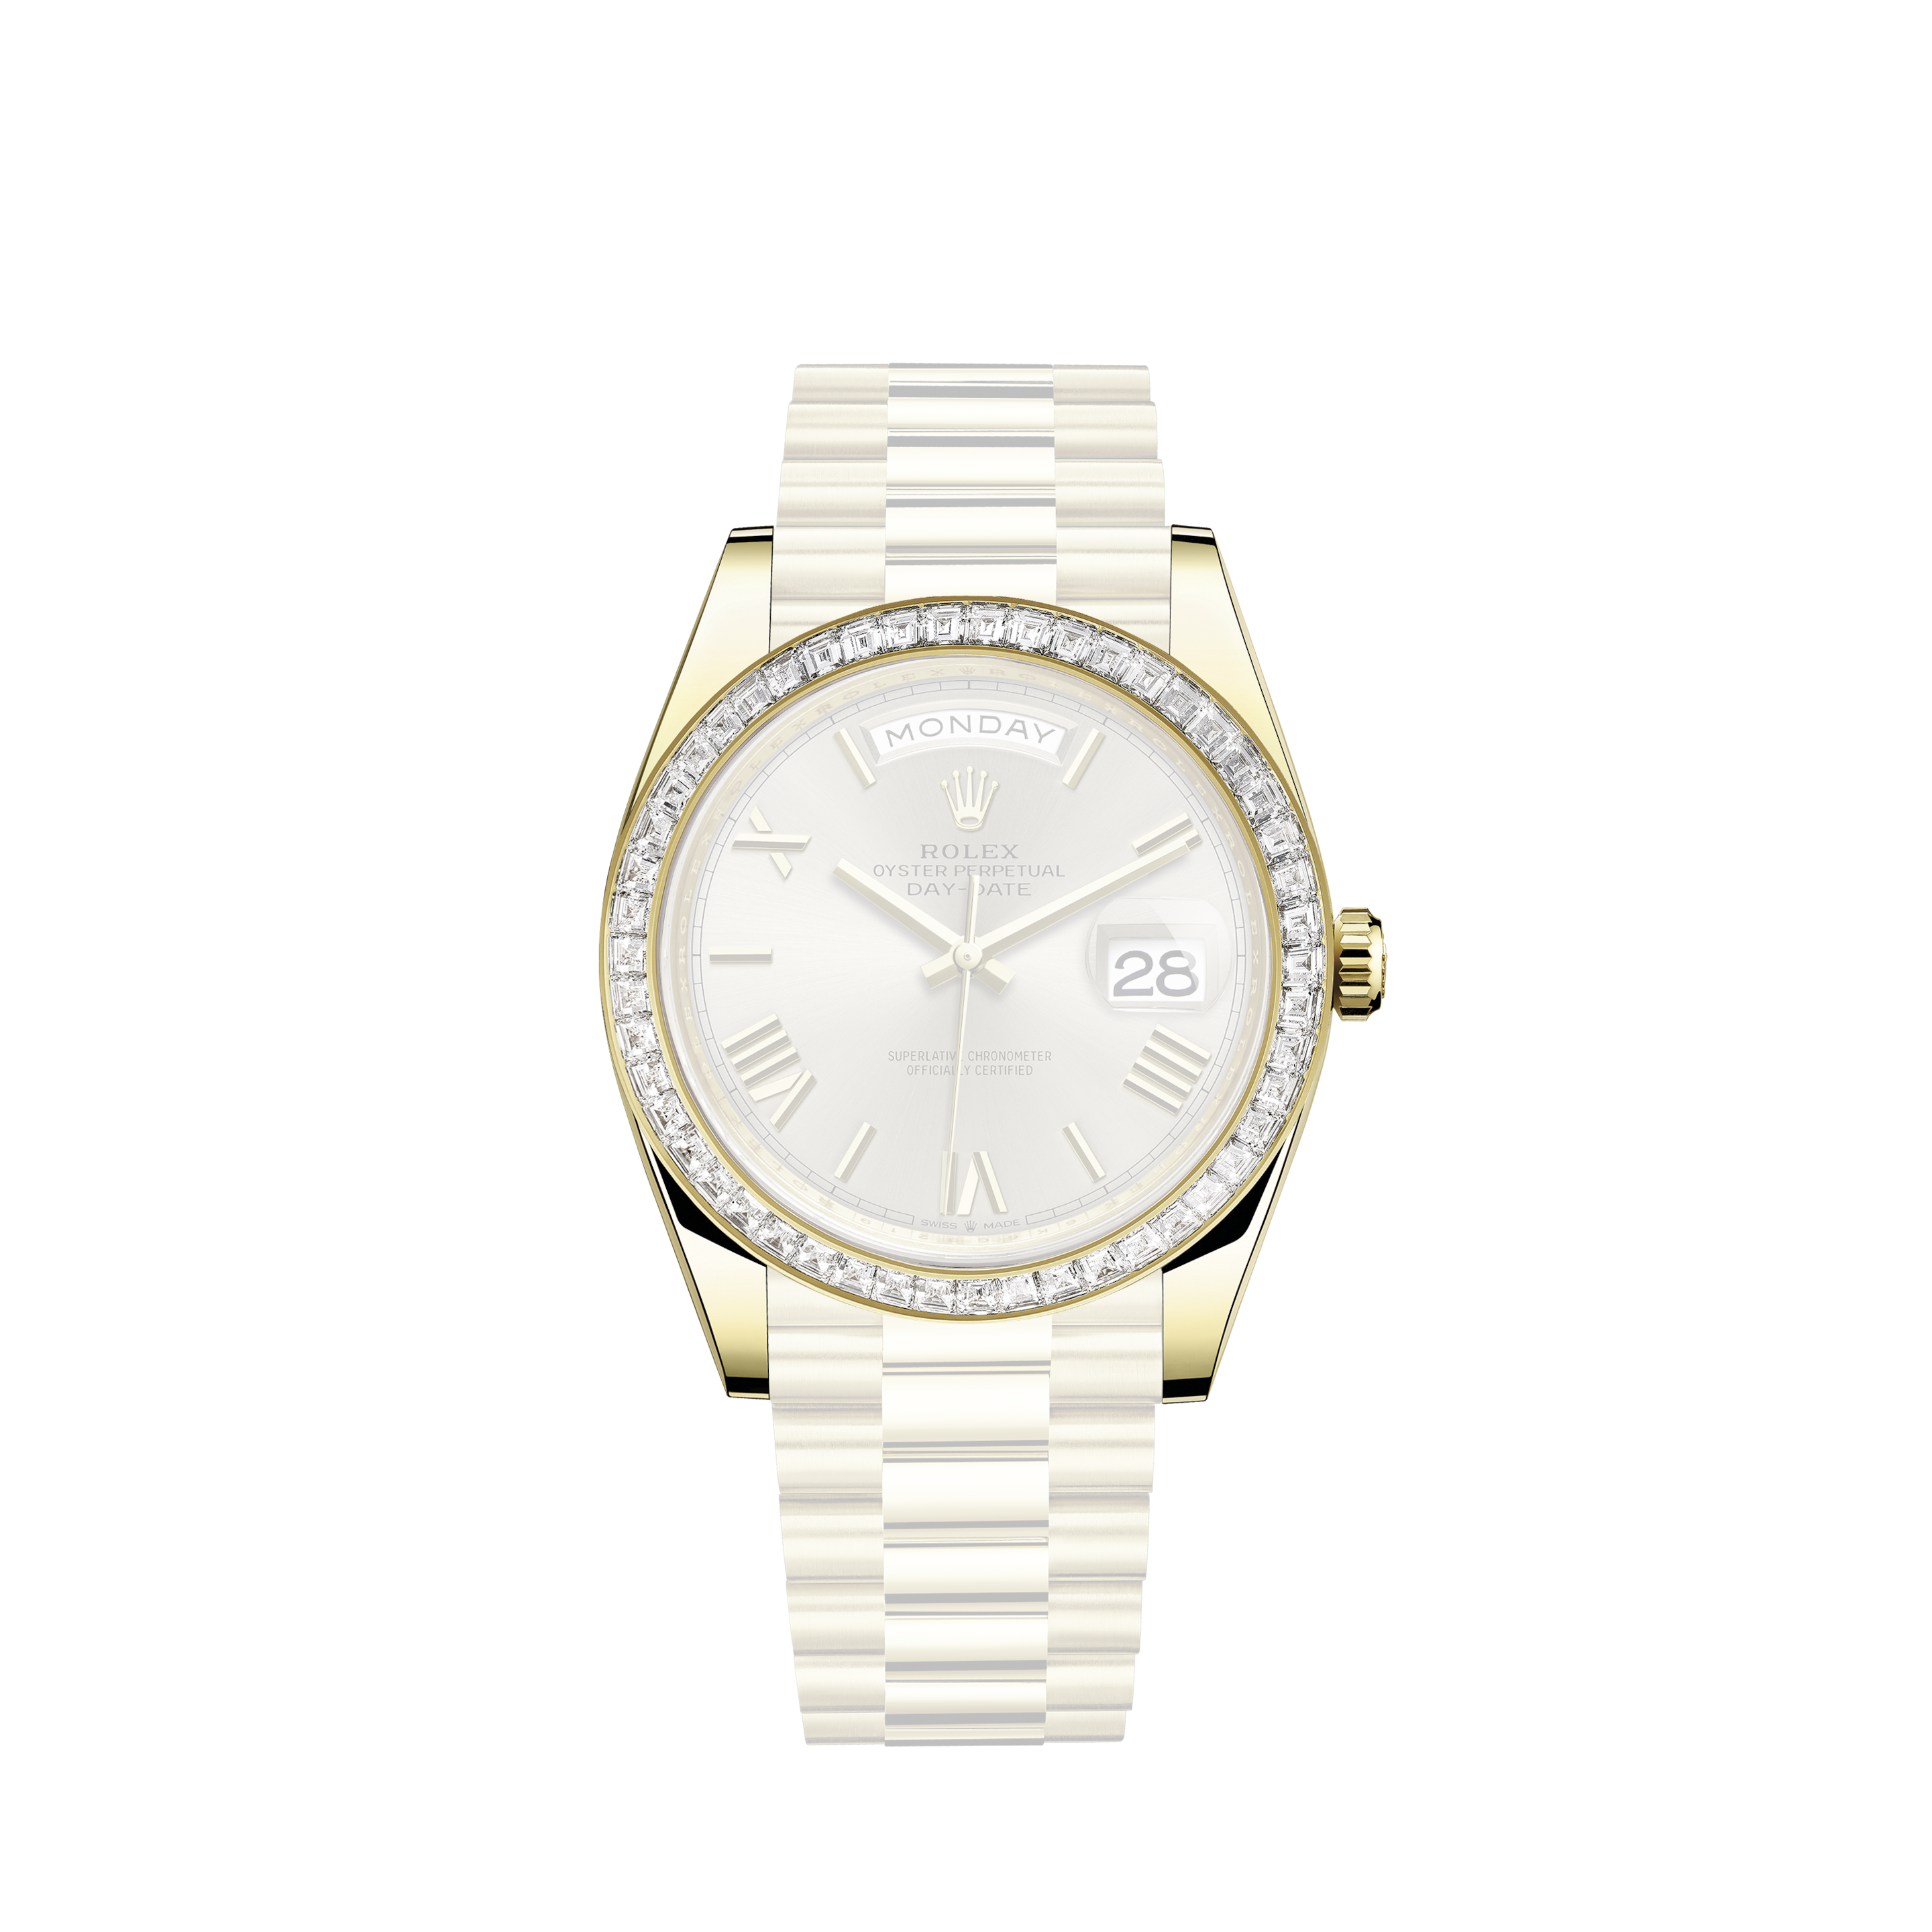 Rolex Oyster Datejust Perpetual Automatic Lady 6517Rolex Oyster Datejust President 18K Yellow Gold Deep Blue Dial 31 mm